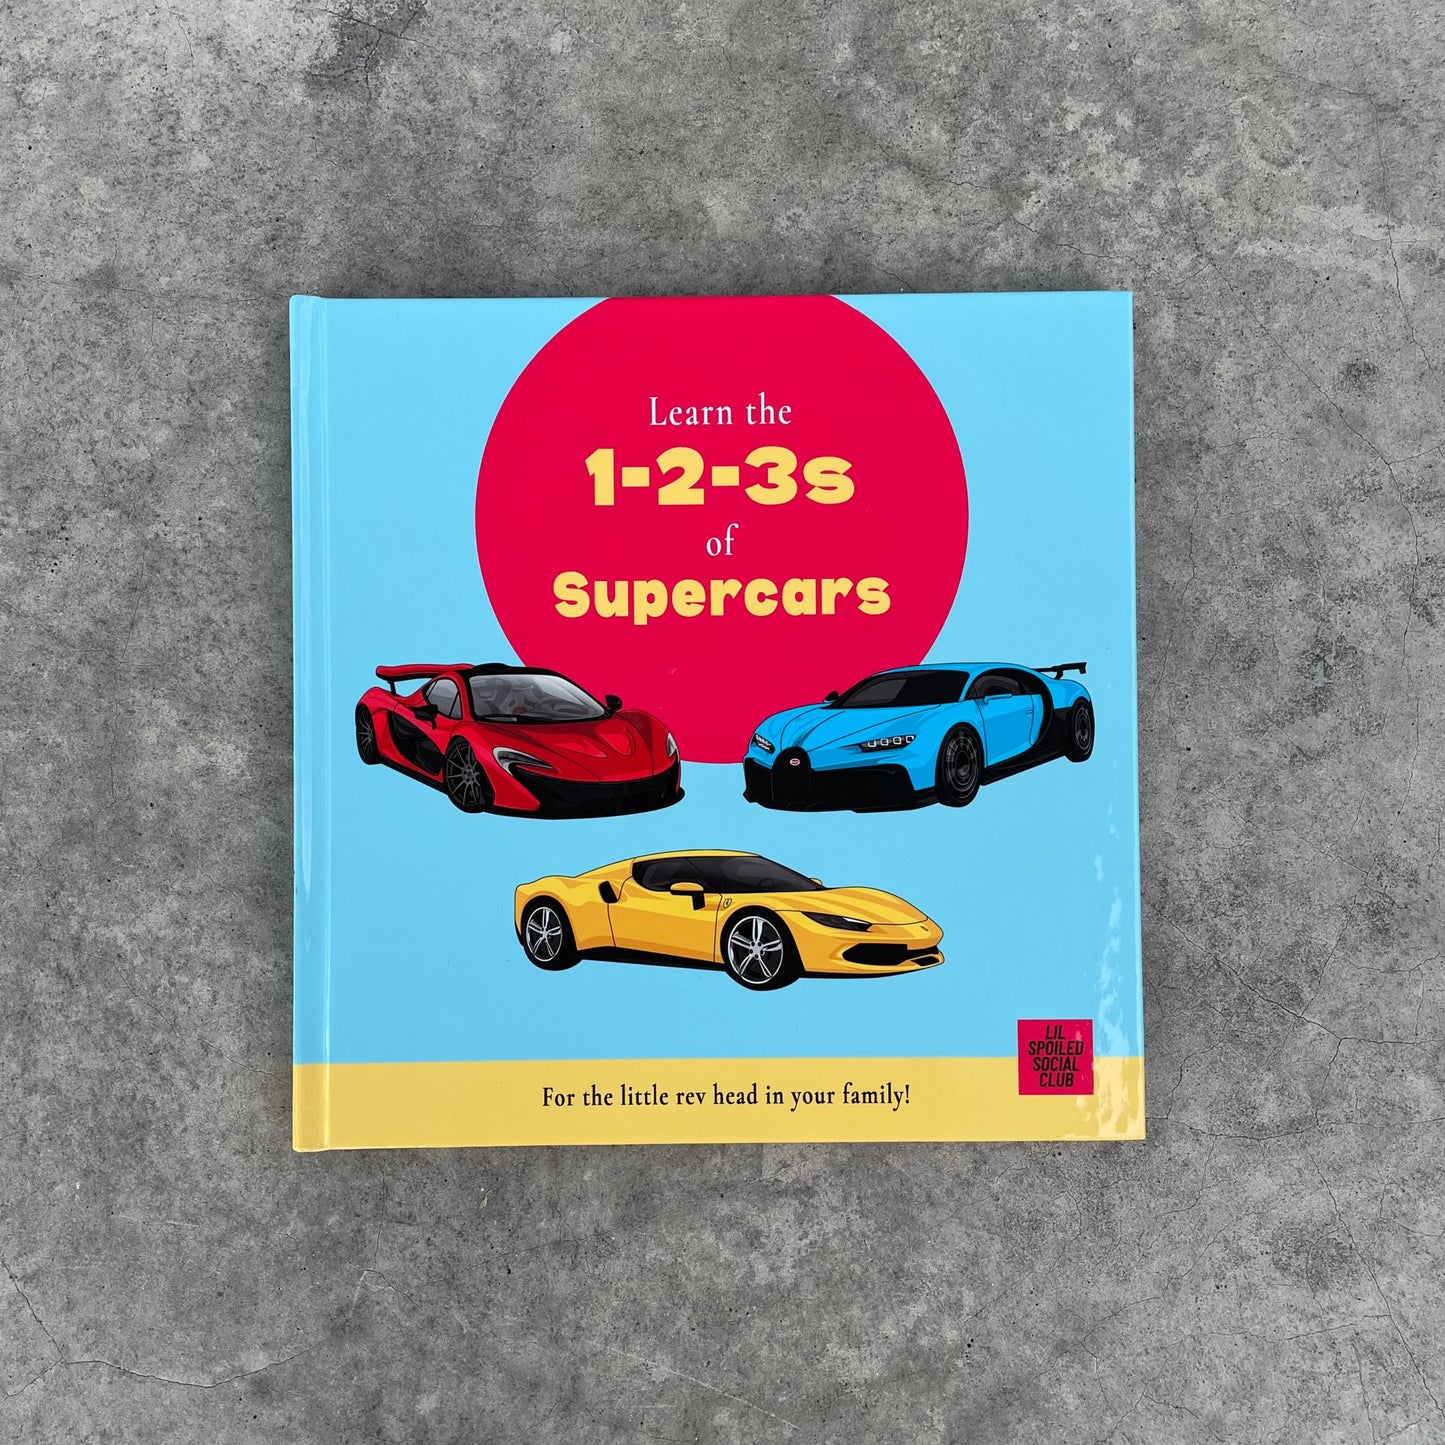 Learn the 1-2-3s of Supercars